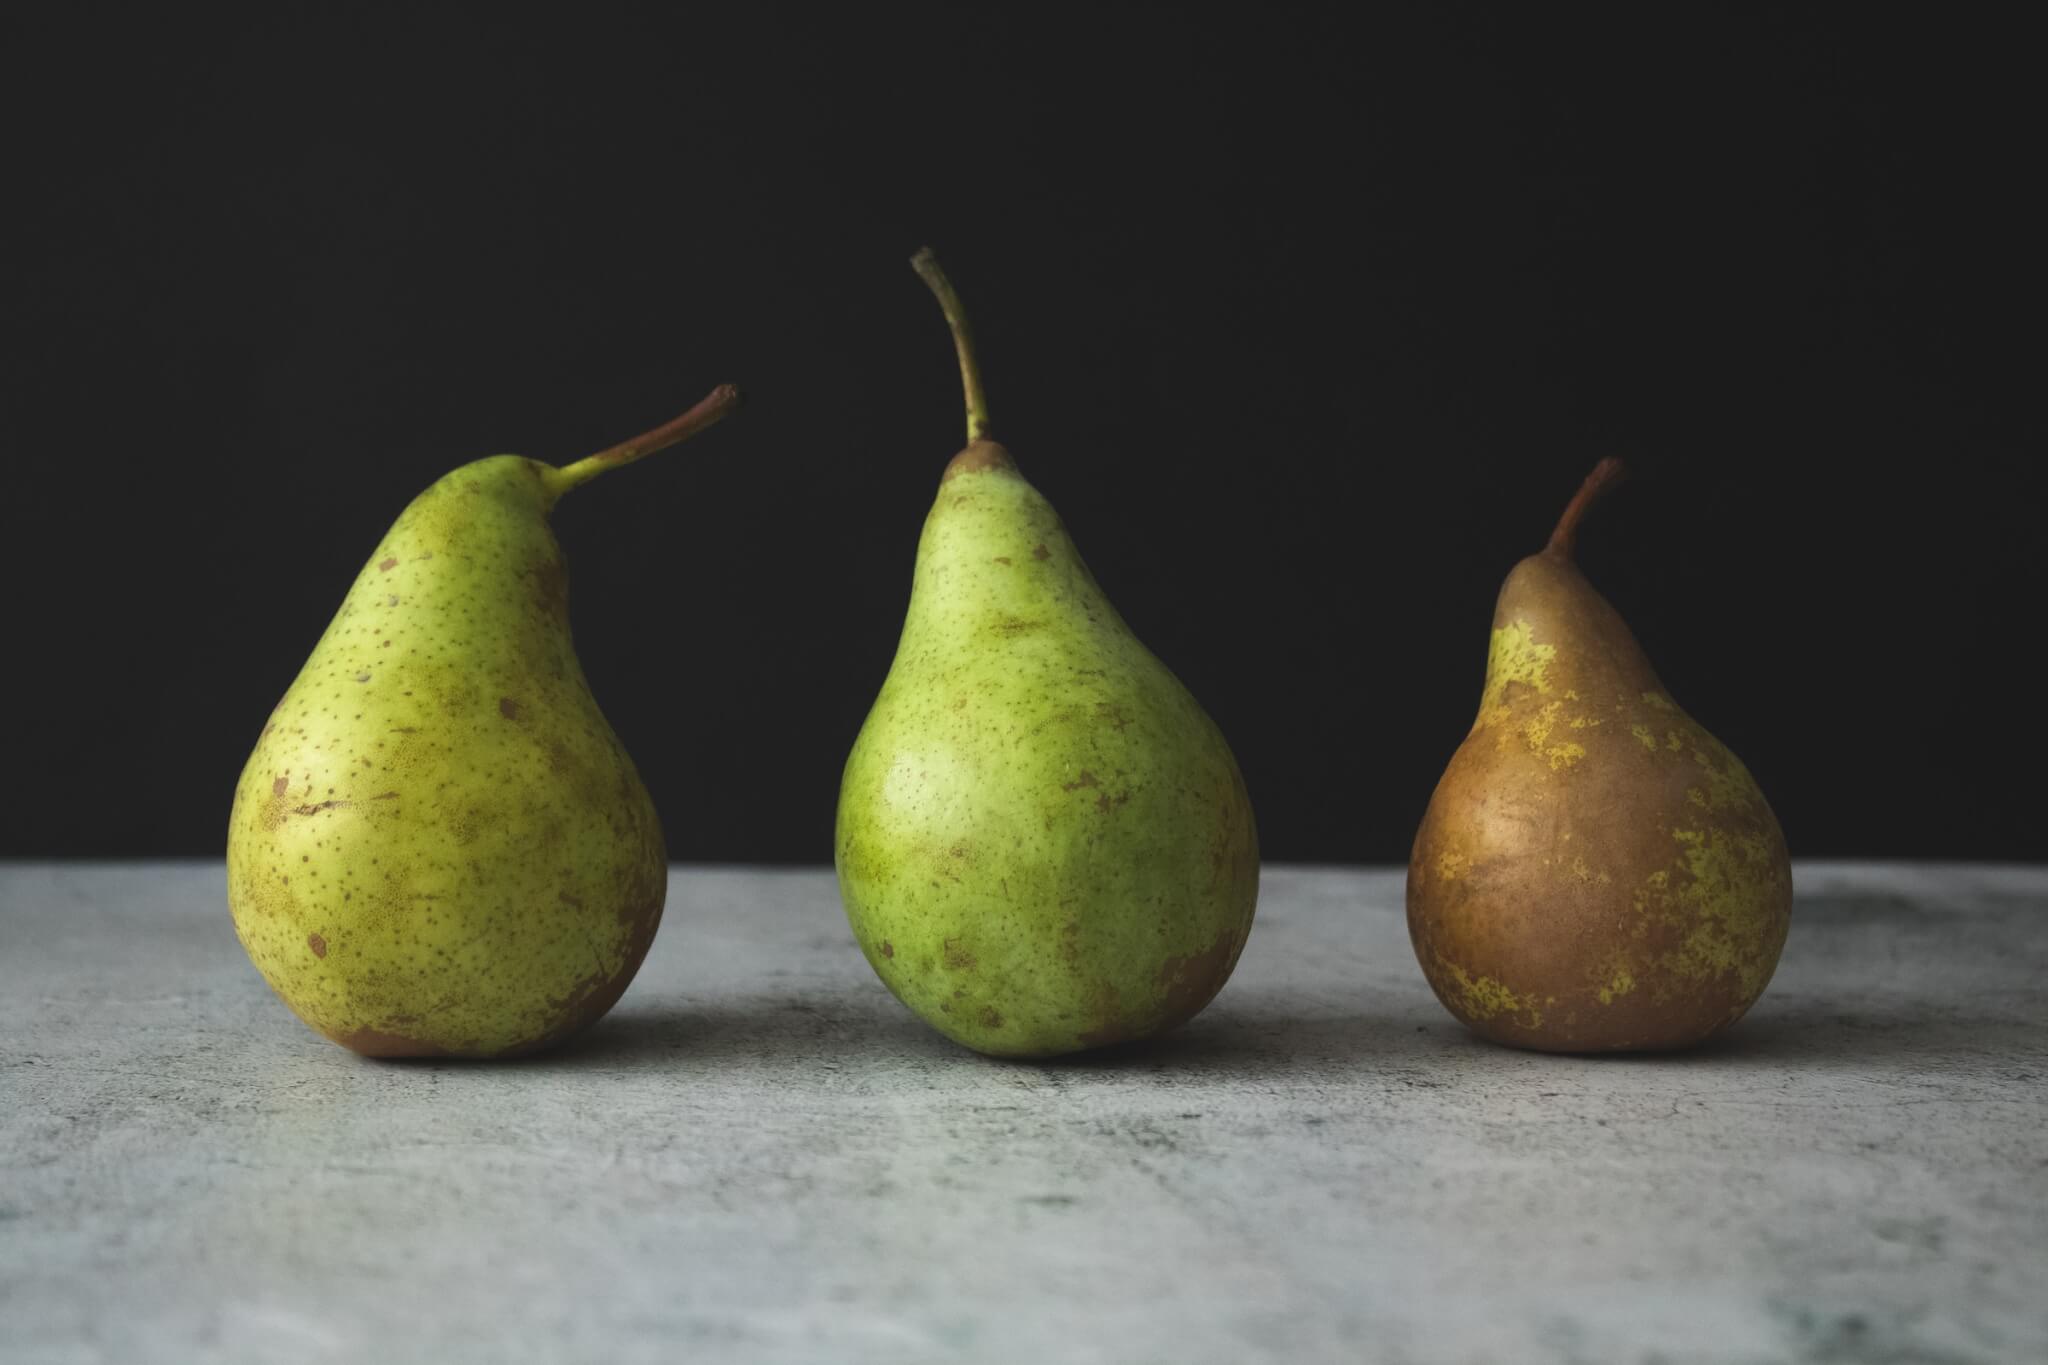 three pears in a row on a table, one brown